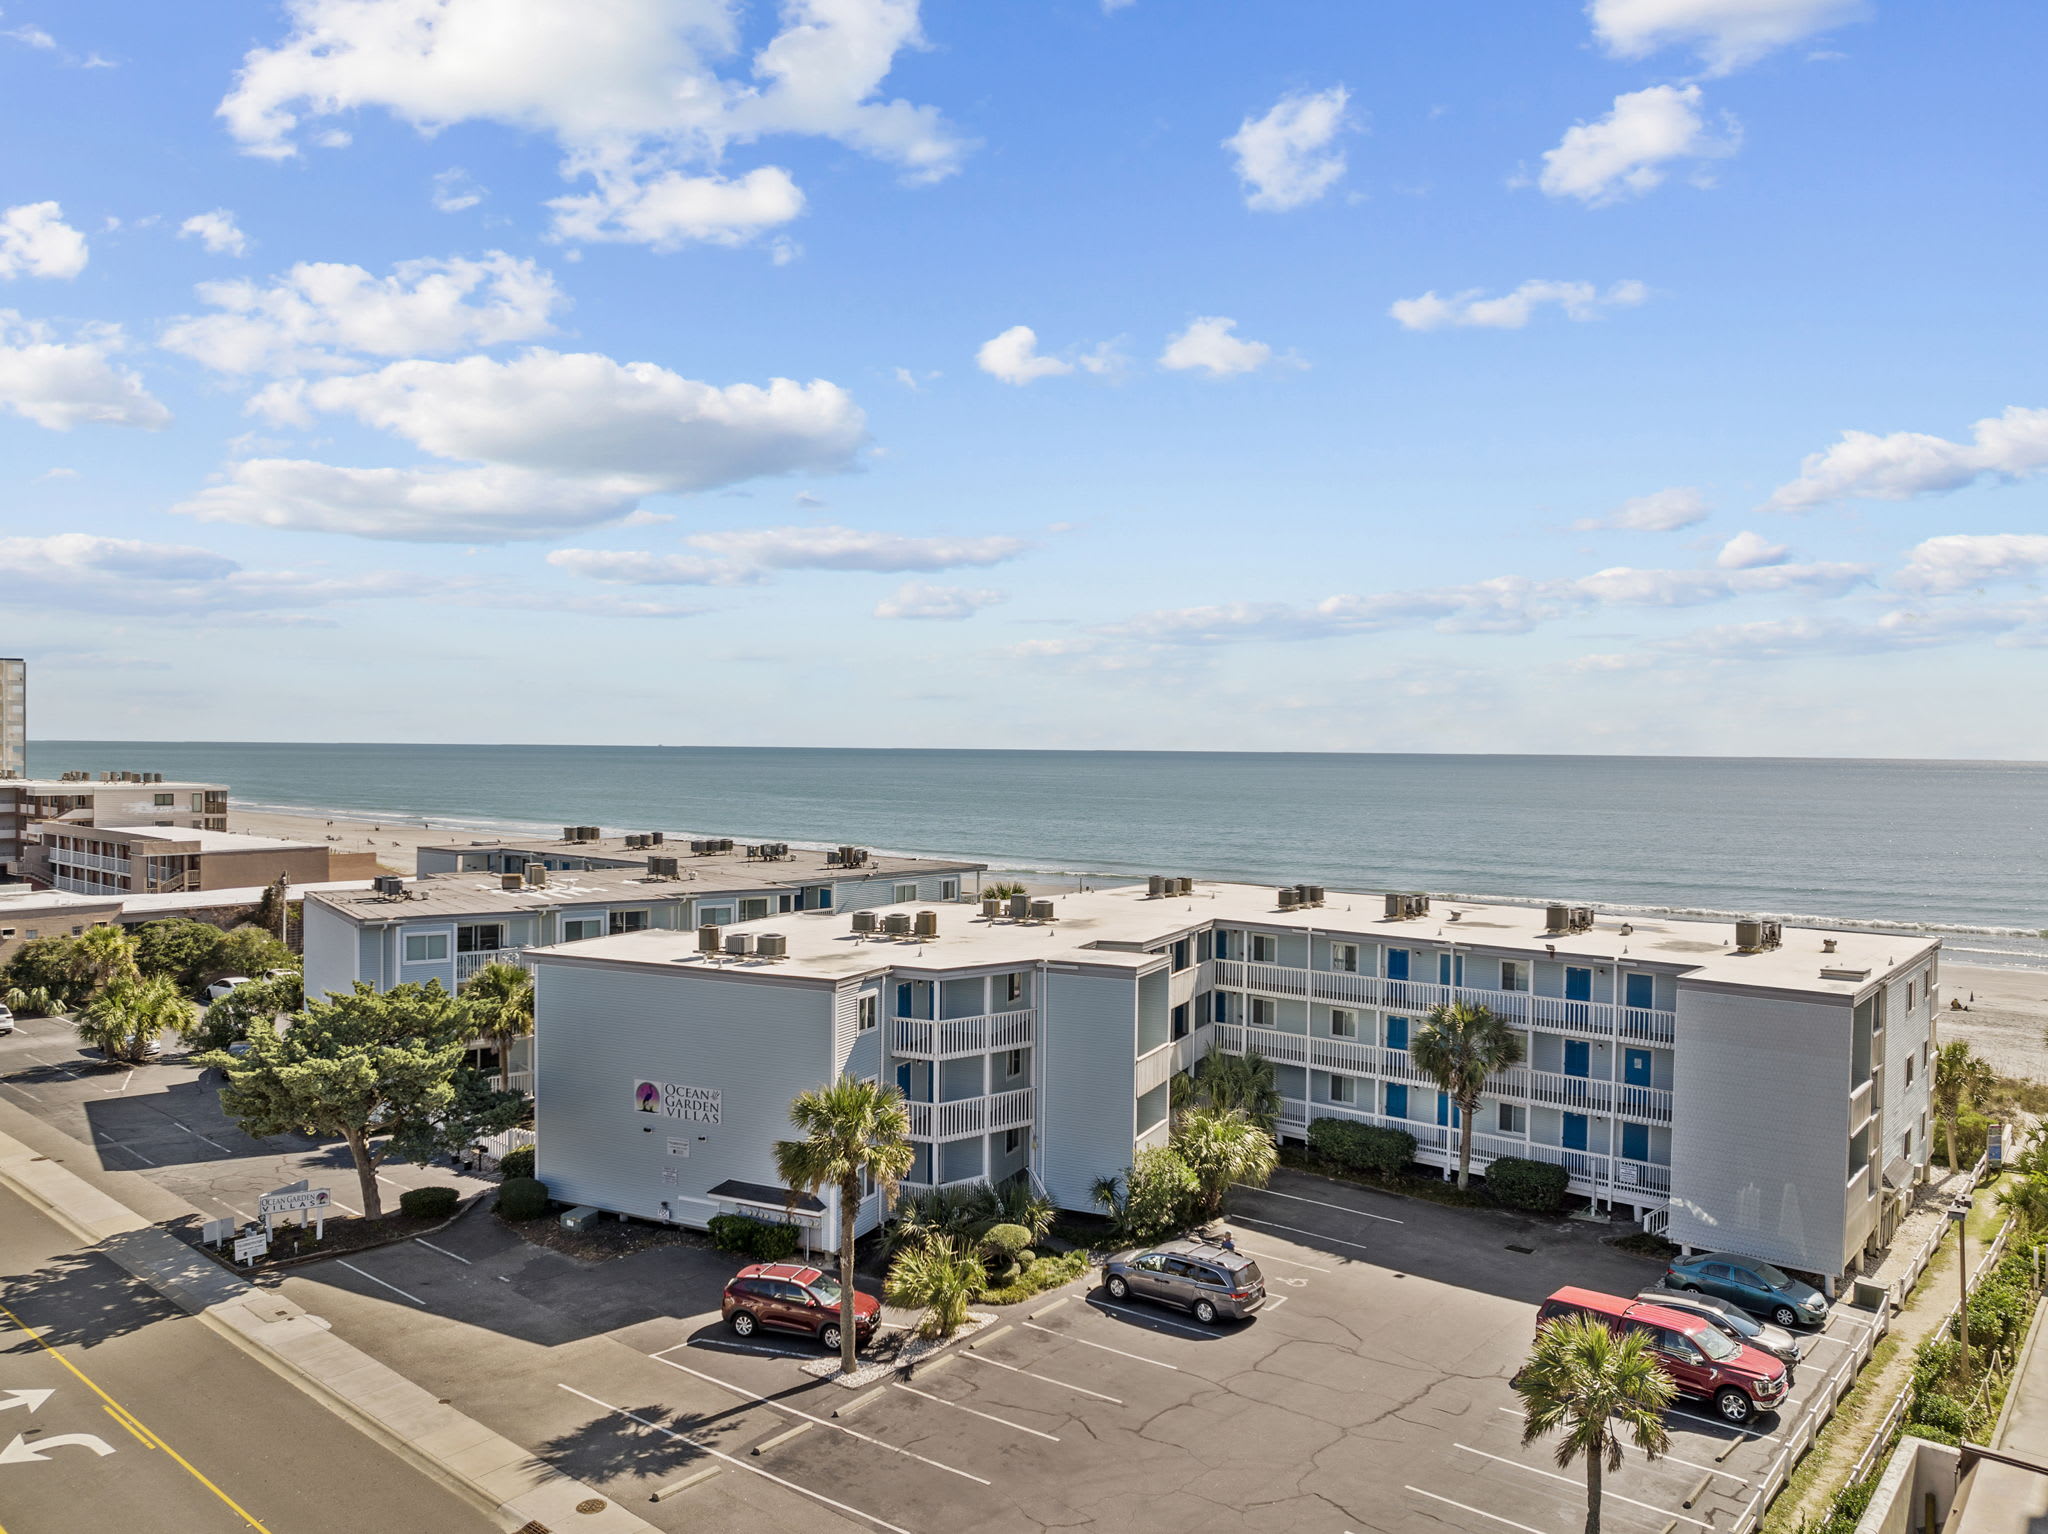 We are located steps away from the beach!